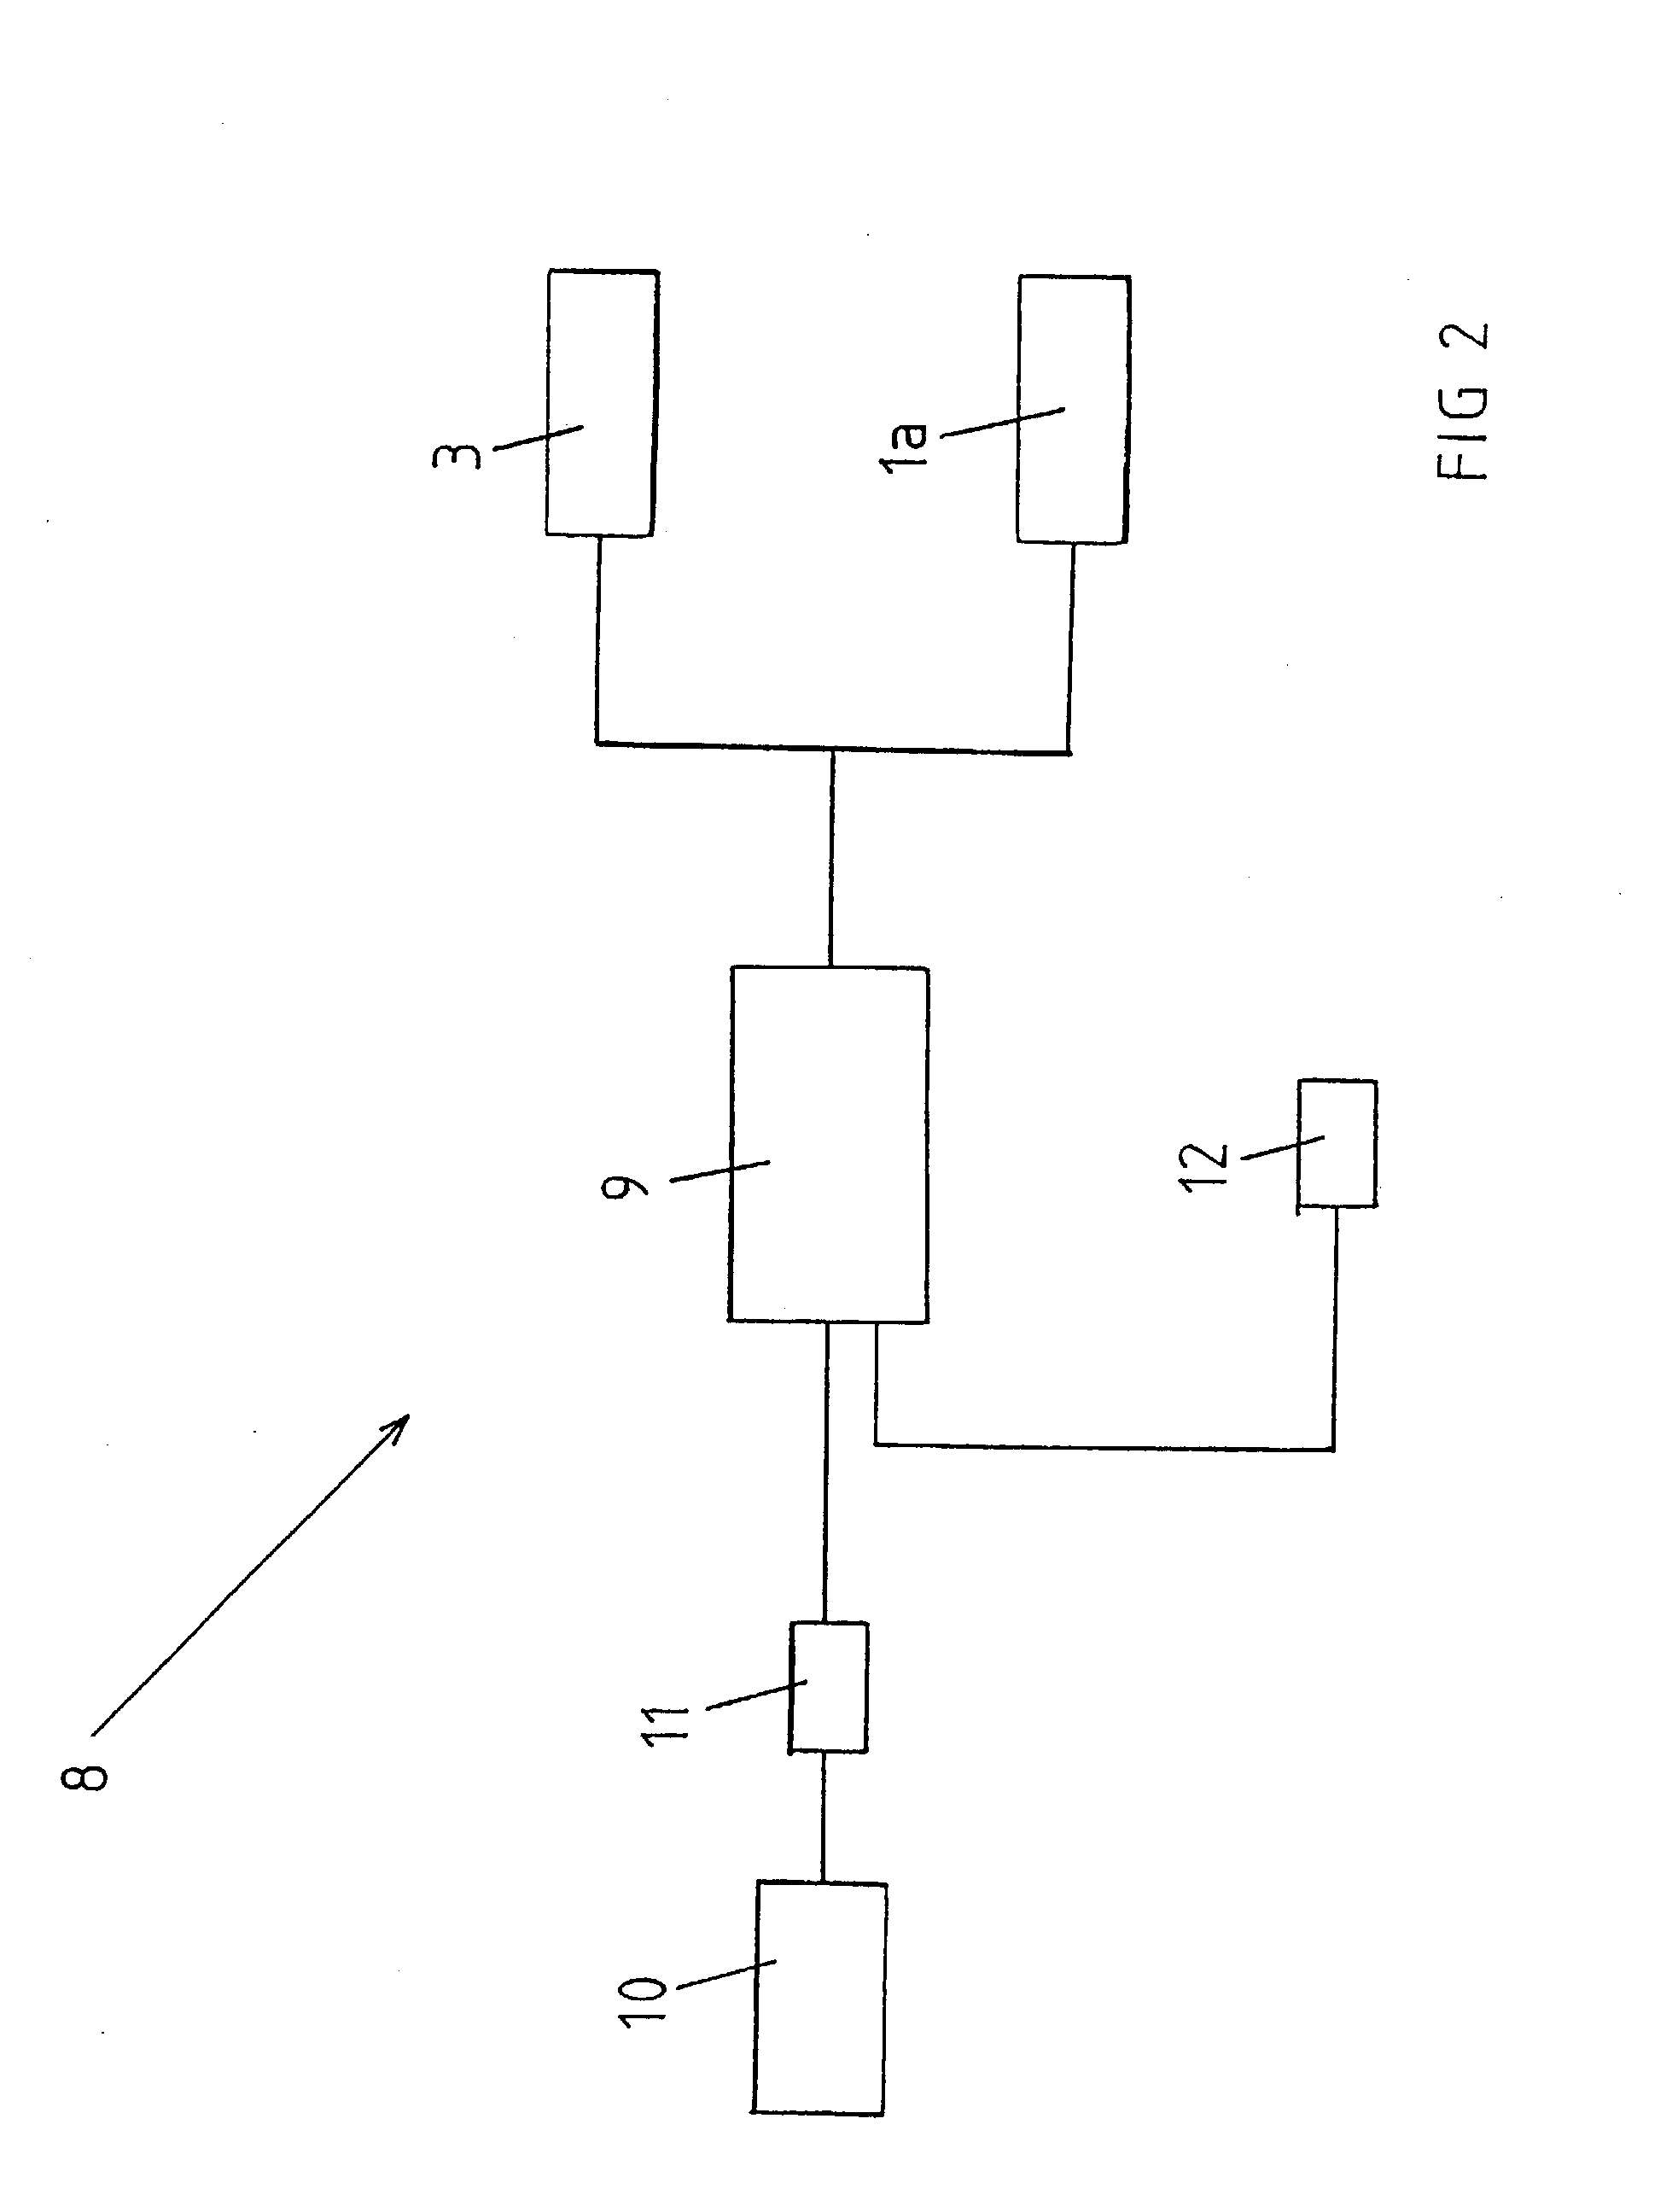 Device to control a brake arrangement and a brake system for a heavy vehicle with such a brake arrangement